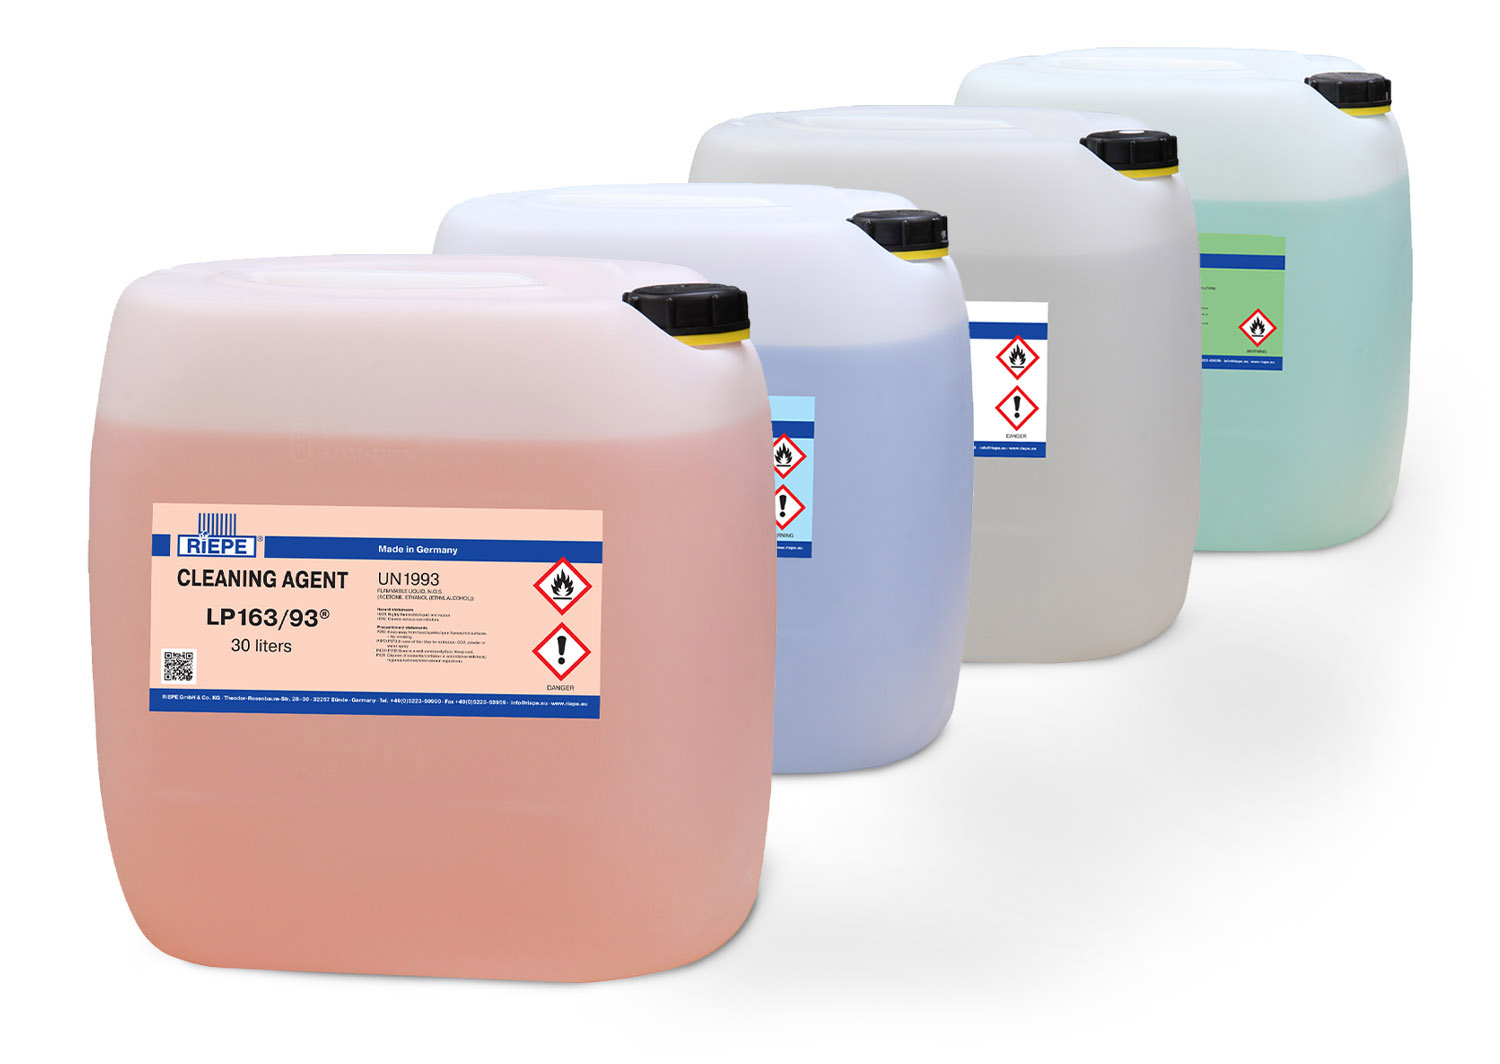 Riepe 10L and 30L Cleaning Agents